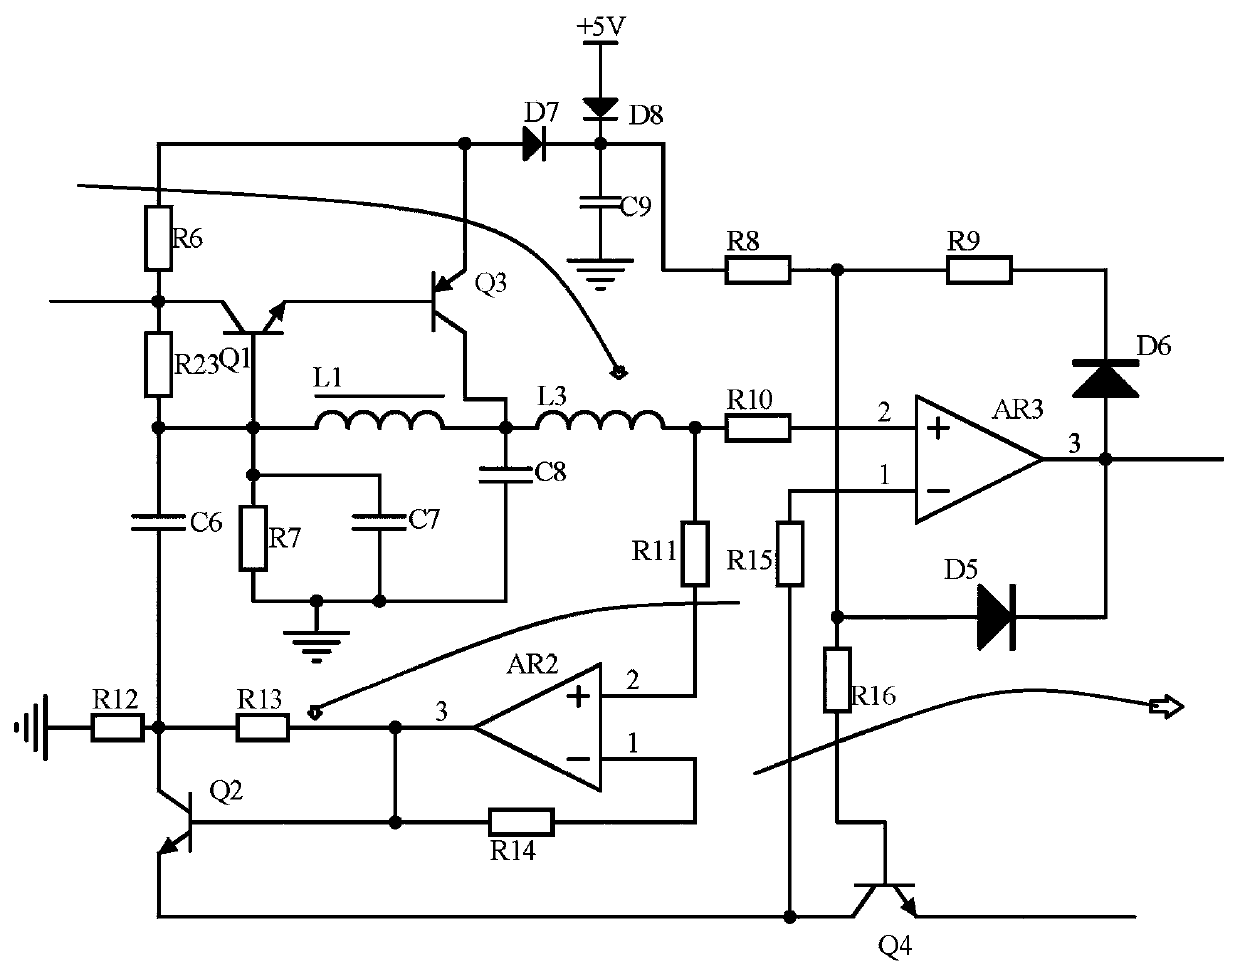 A signal compensation circuit for a water supply remote monitoring system